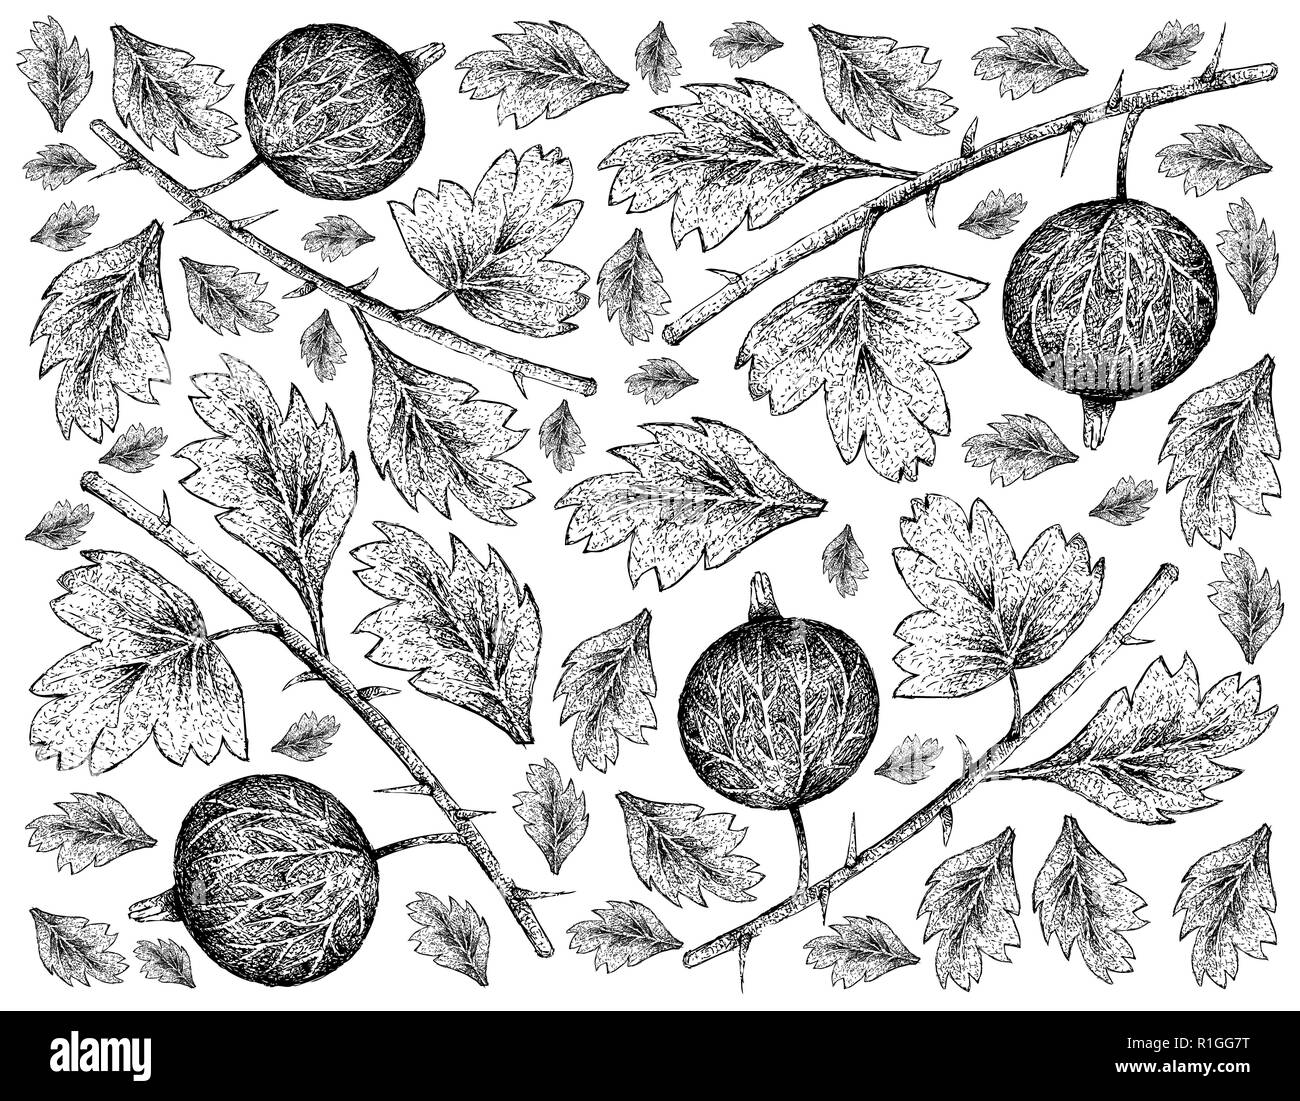 Berry Fruits, Illustration Wallpaper of Hand Drawn Sketch Fresh Gooseberry Isolated on White Background. Good Source of Vitamin C and A. Stock Photo